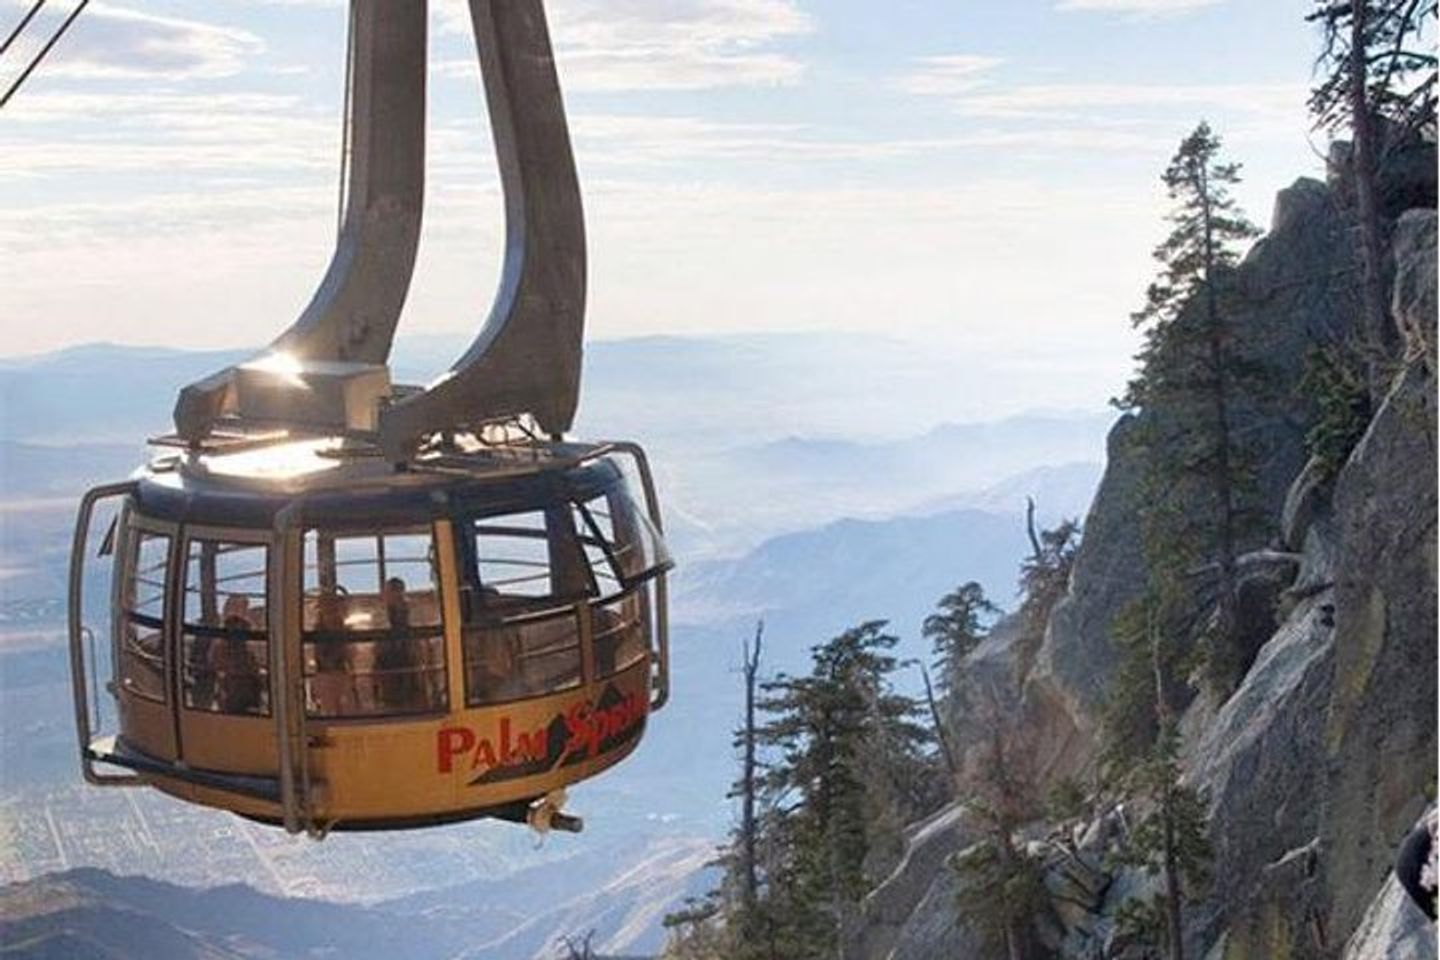 Taking the Palm Springs Aerial Tramway